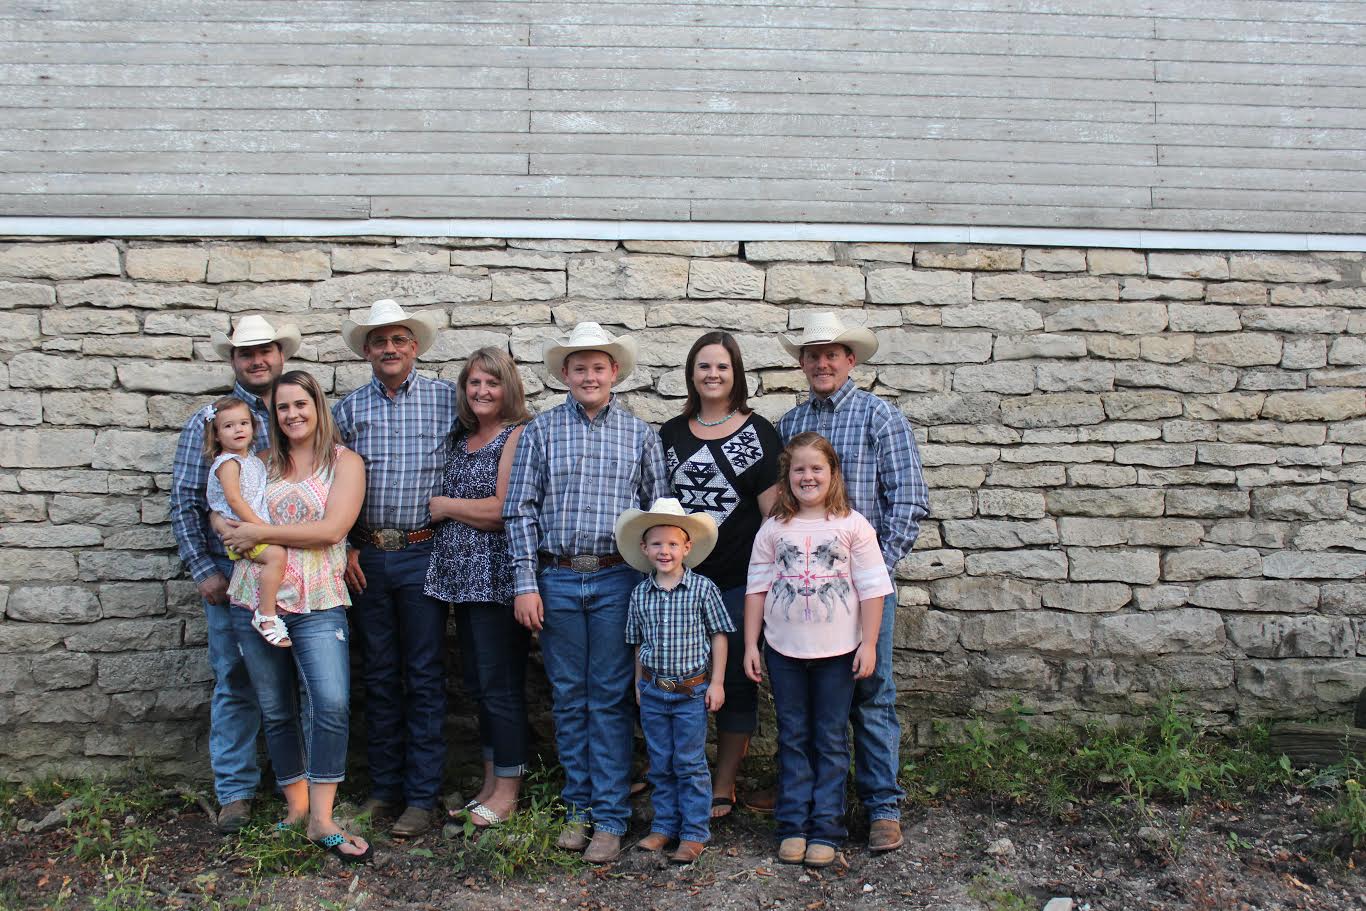 Flint Hills Genetics is a family bucking bull breeding operation at Strong City. The partners include (left to right) Adam, Kelsey and Lakin Spain; Kim, Lana and Wyatt Reyer; and Jenna, Tate, Karlie and Kyle Gibb.